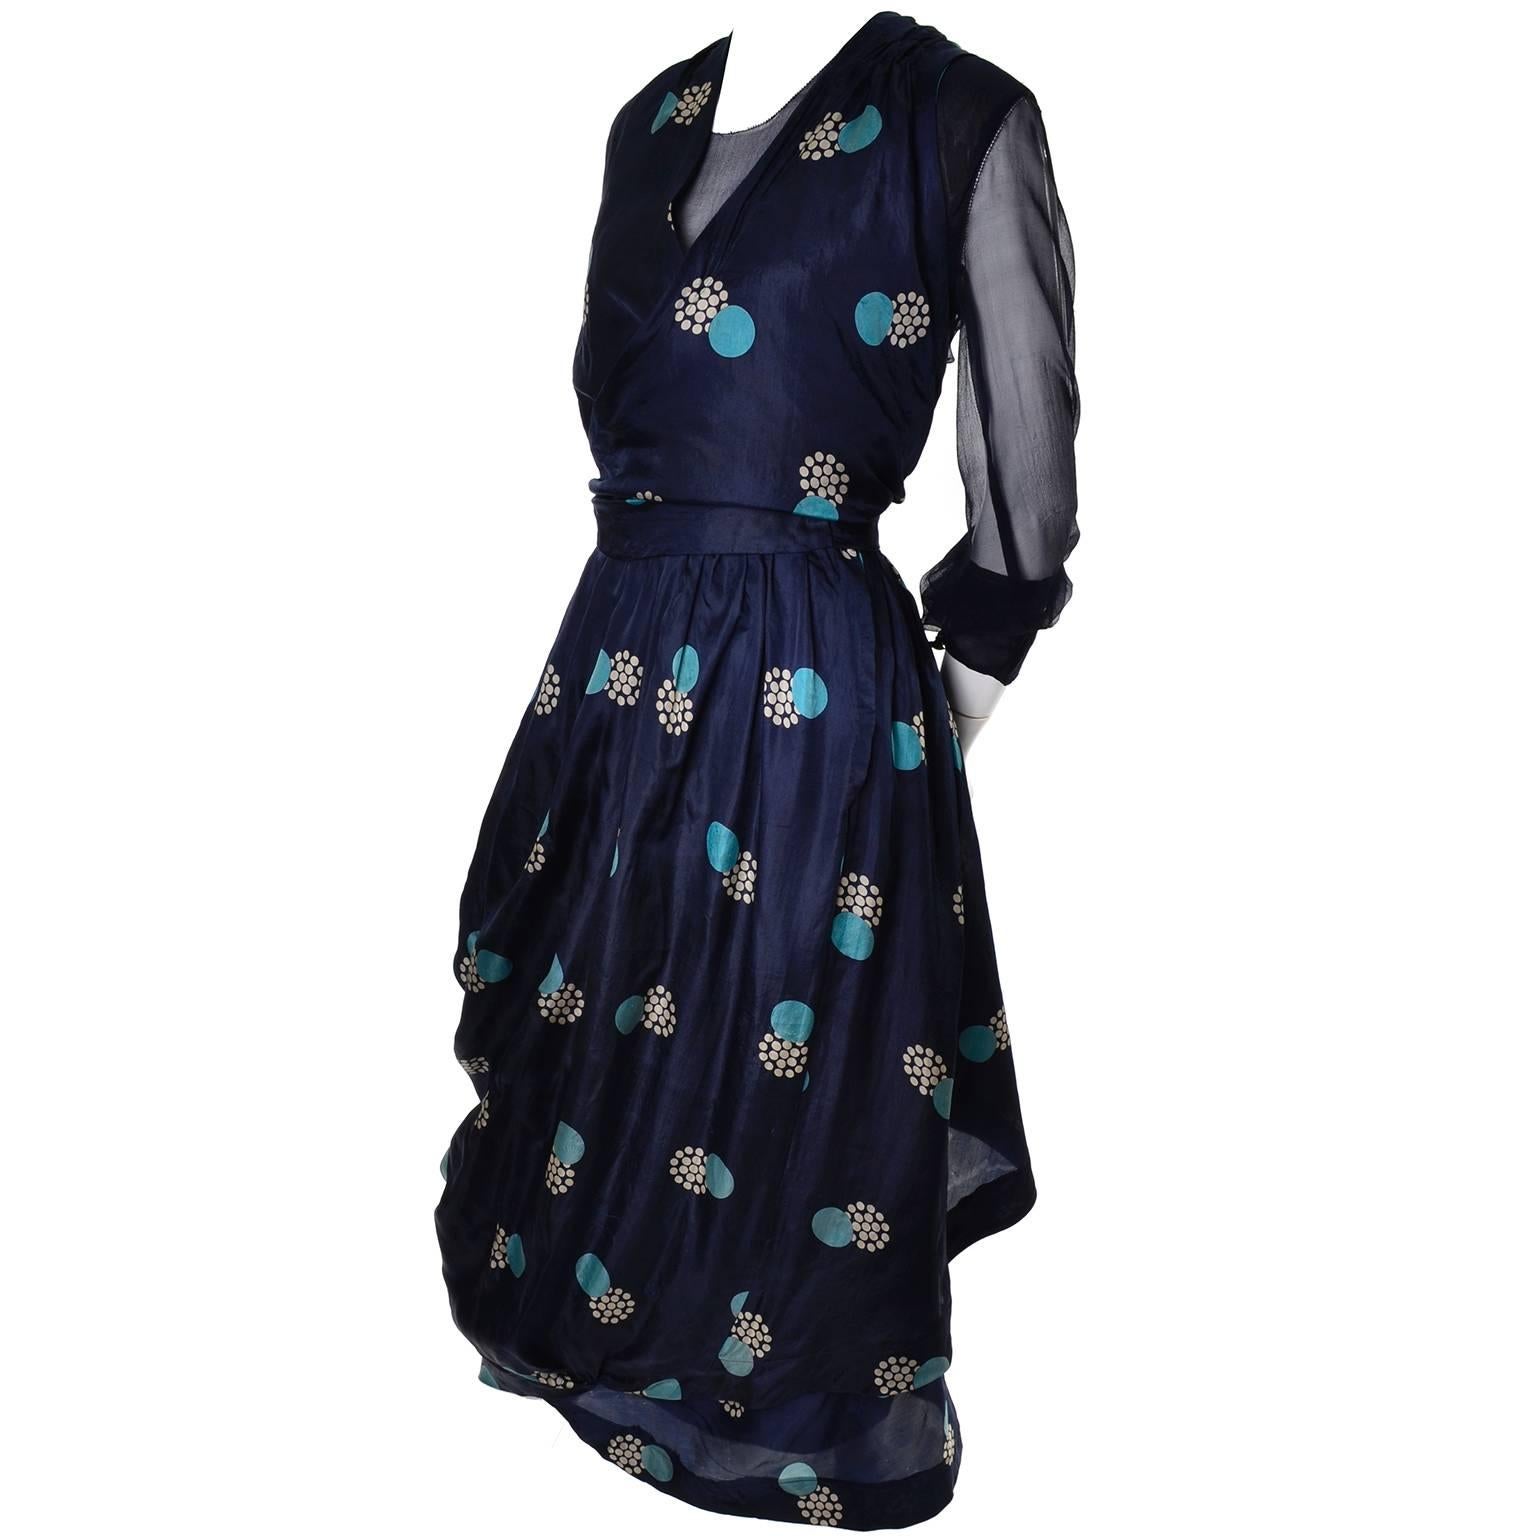 This incredible dress is full of beautiful design elements from head to toe! This Edwardian dress is all one connected piece, but consists of three different layers. The top layer is the printed navy silk that has an abstract geometric circle